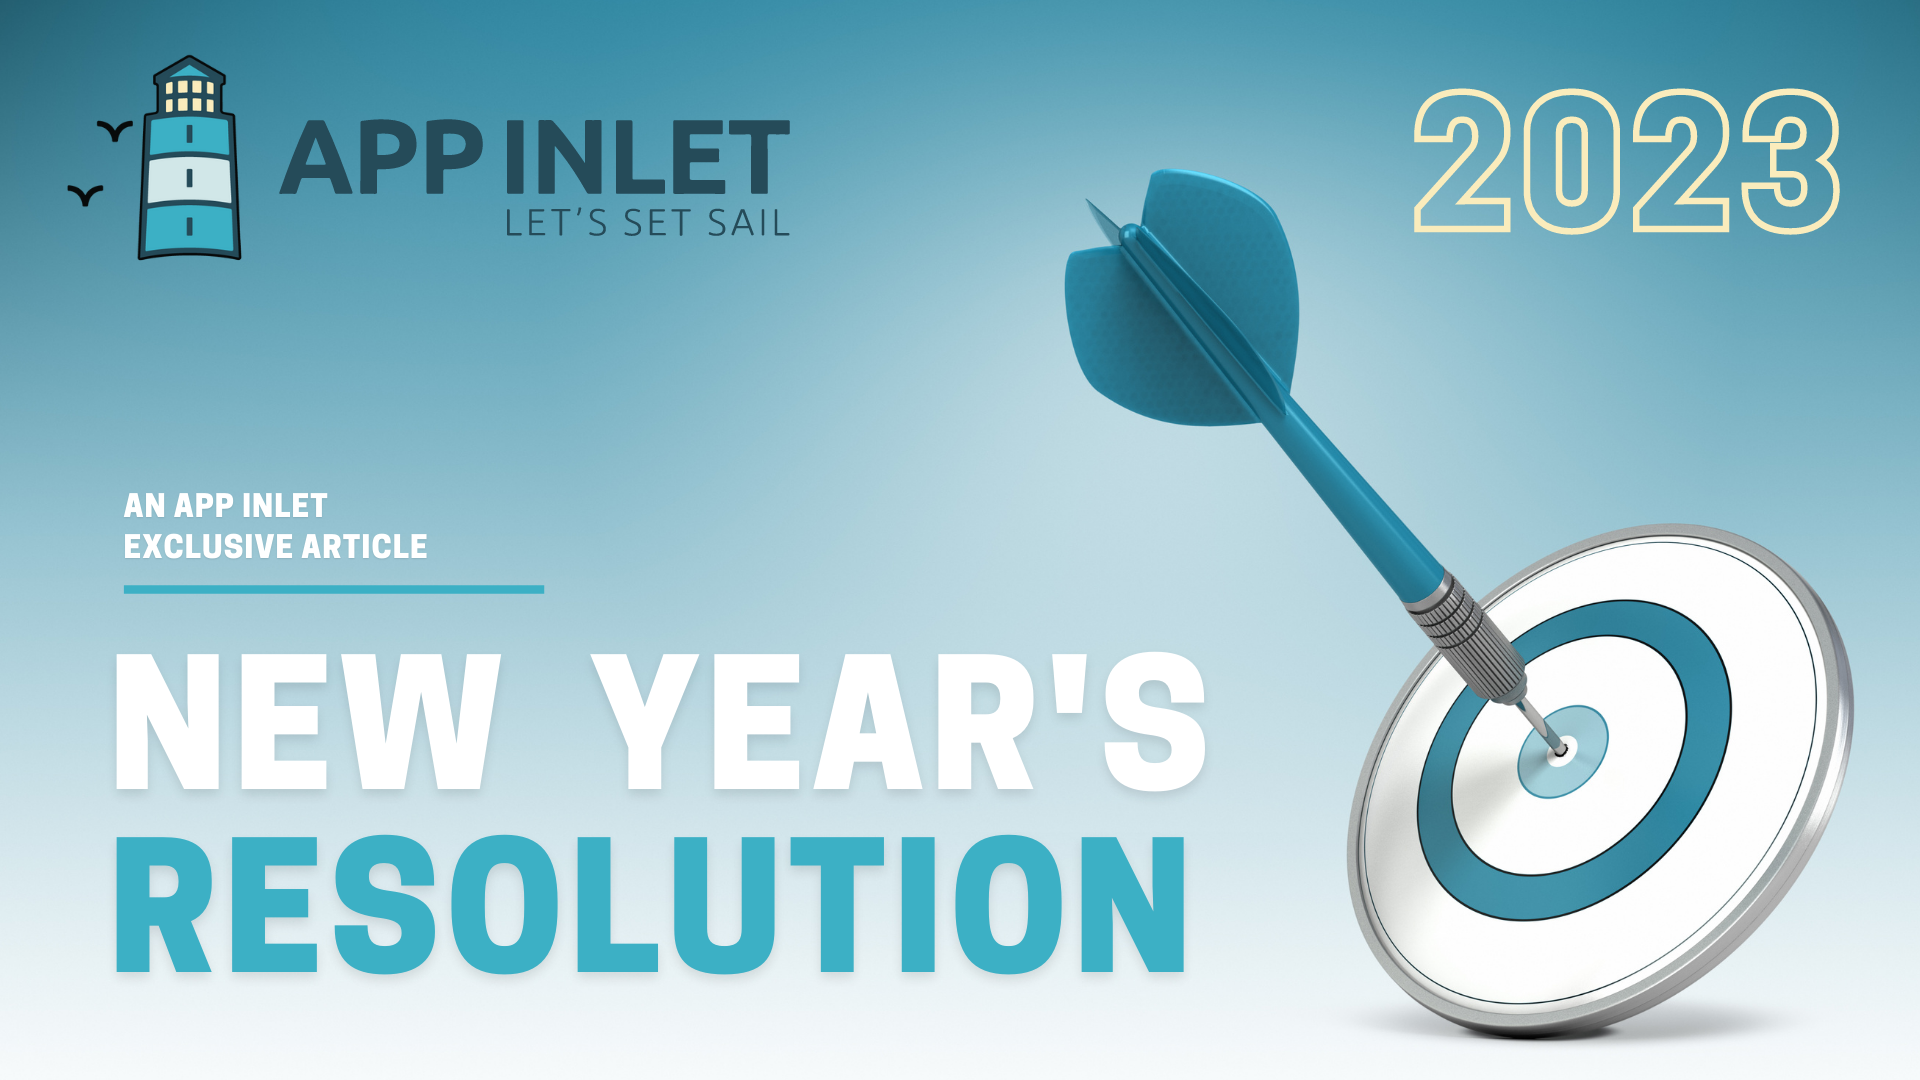 App Inlet’s New Year’s Resolution 2023